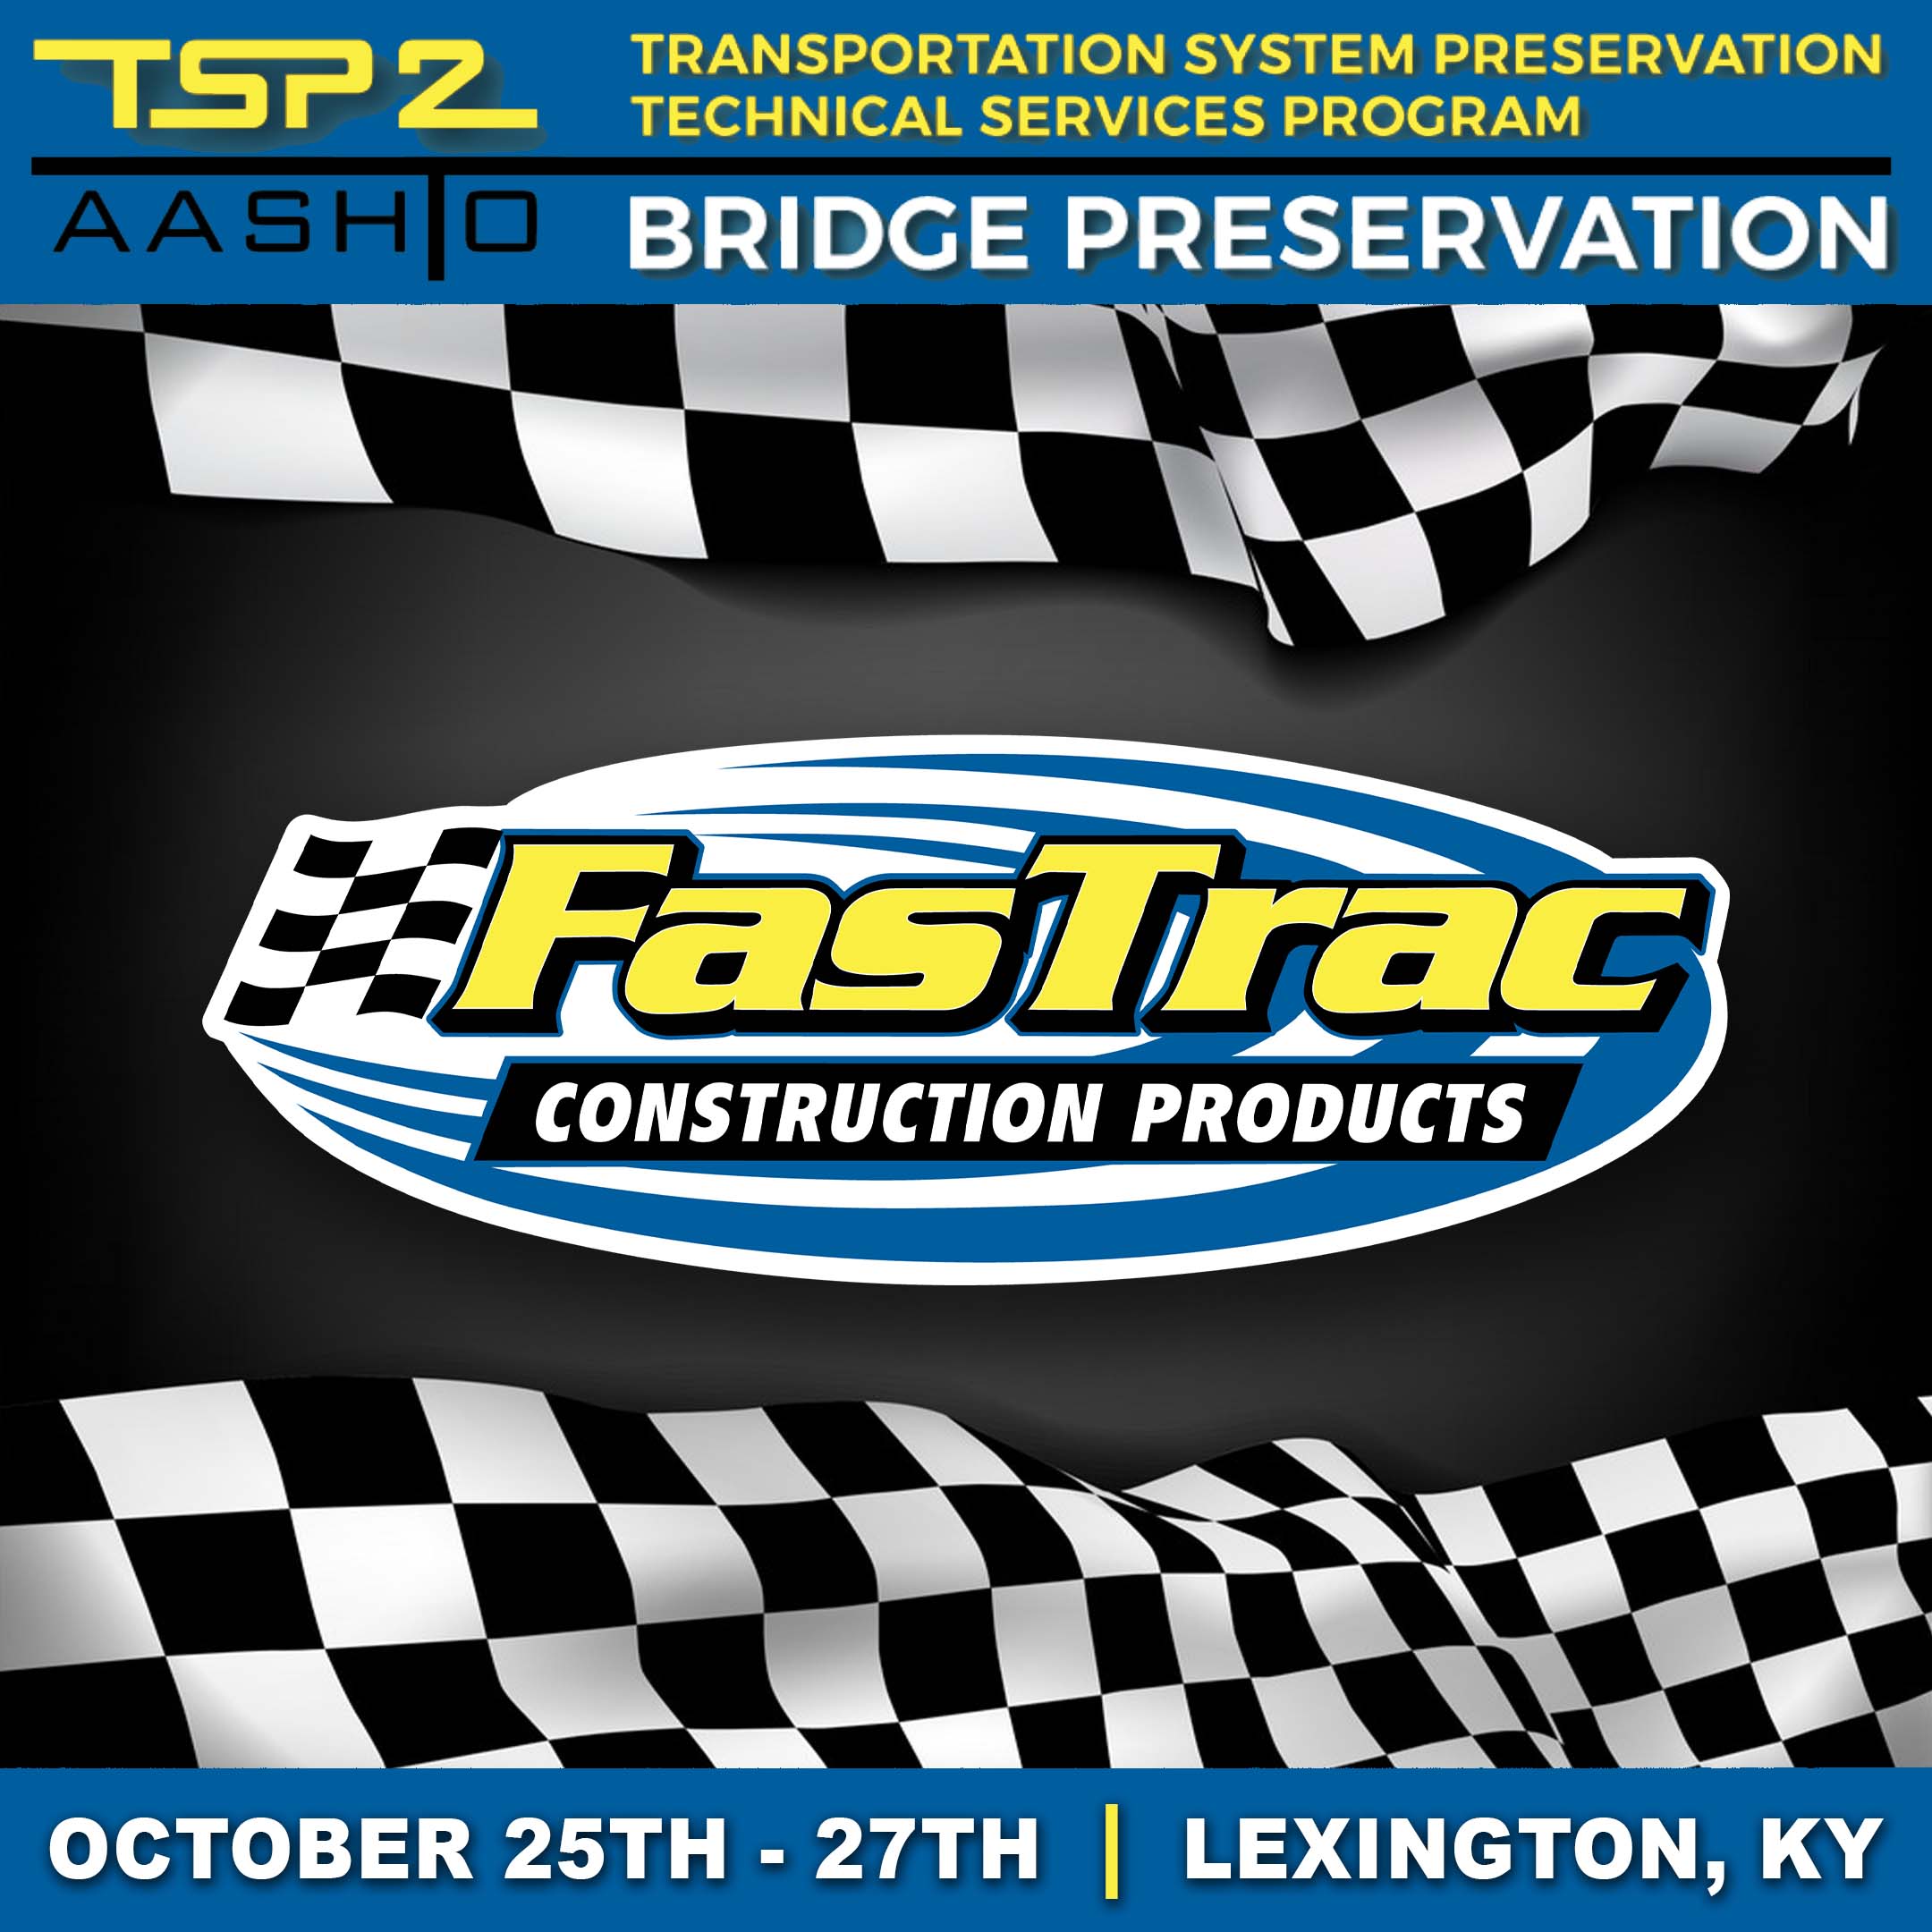 FasTrac attends the Midwest Bridge Preservation Partnership Meeting in Lexington, KY